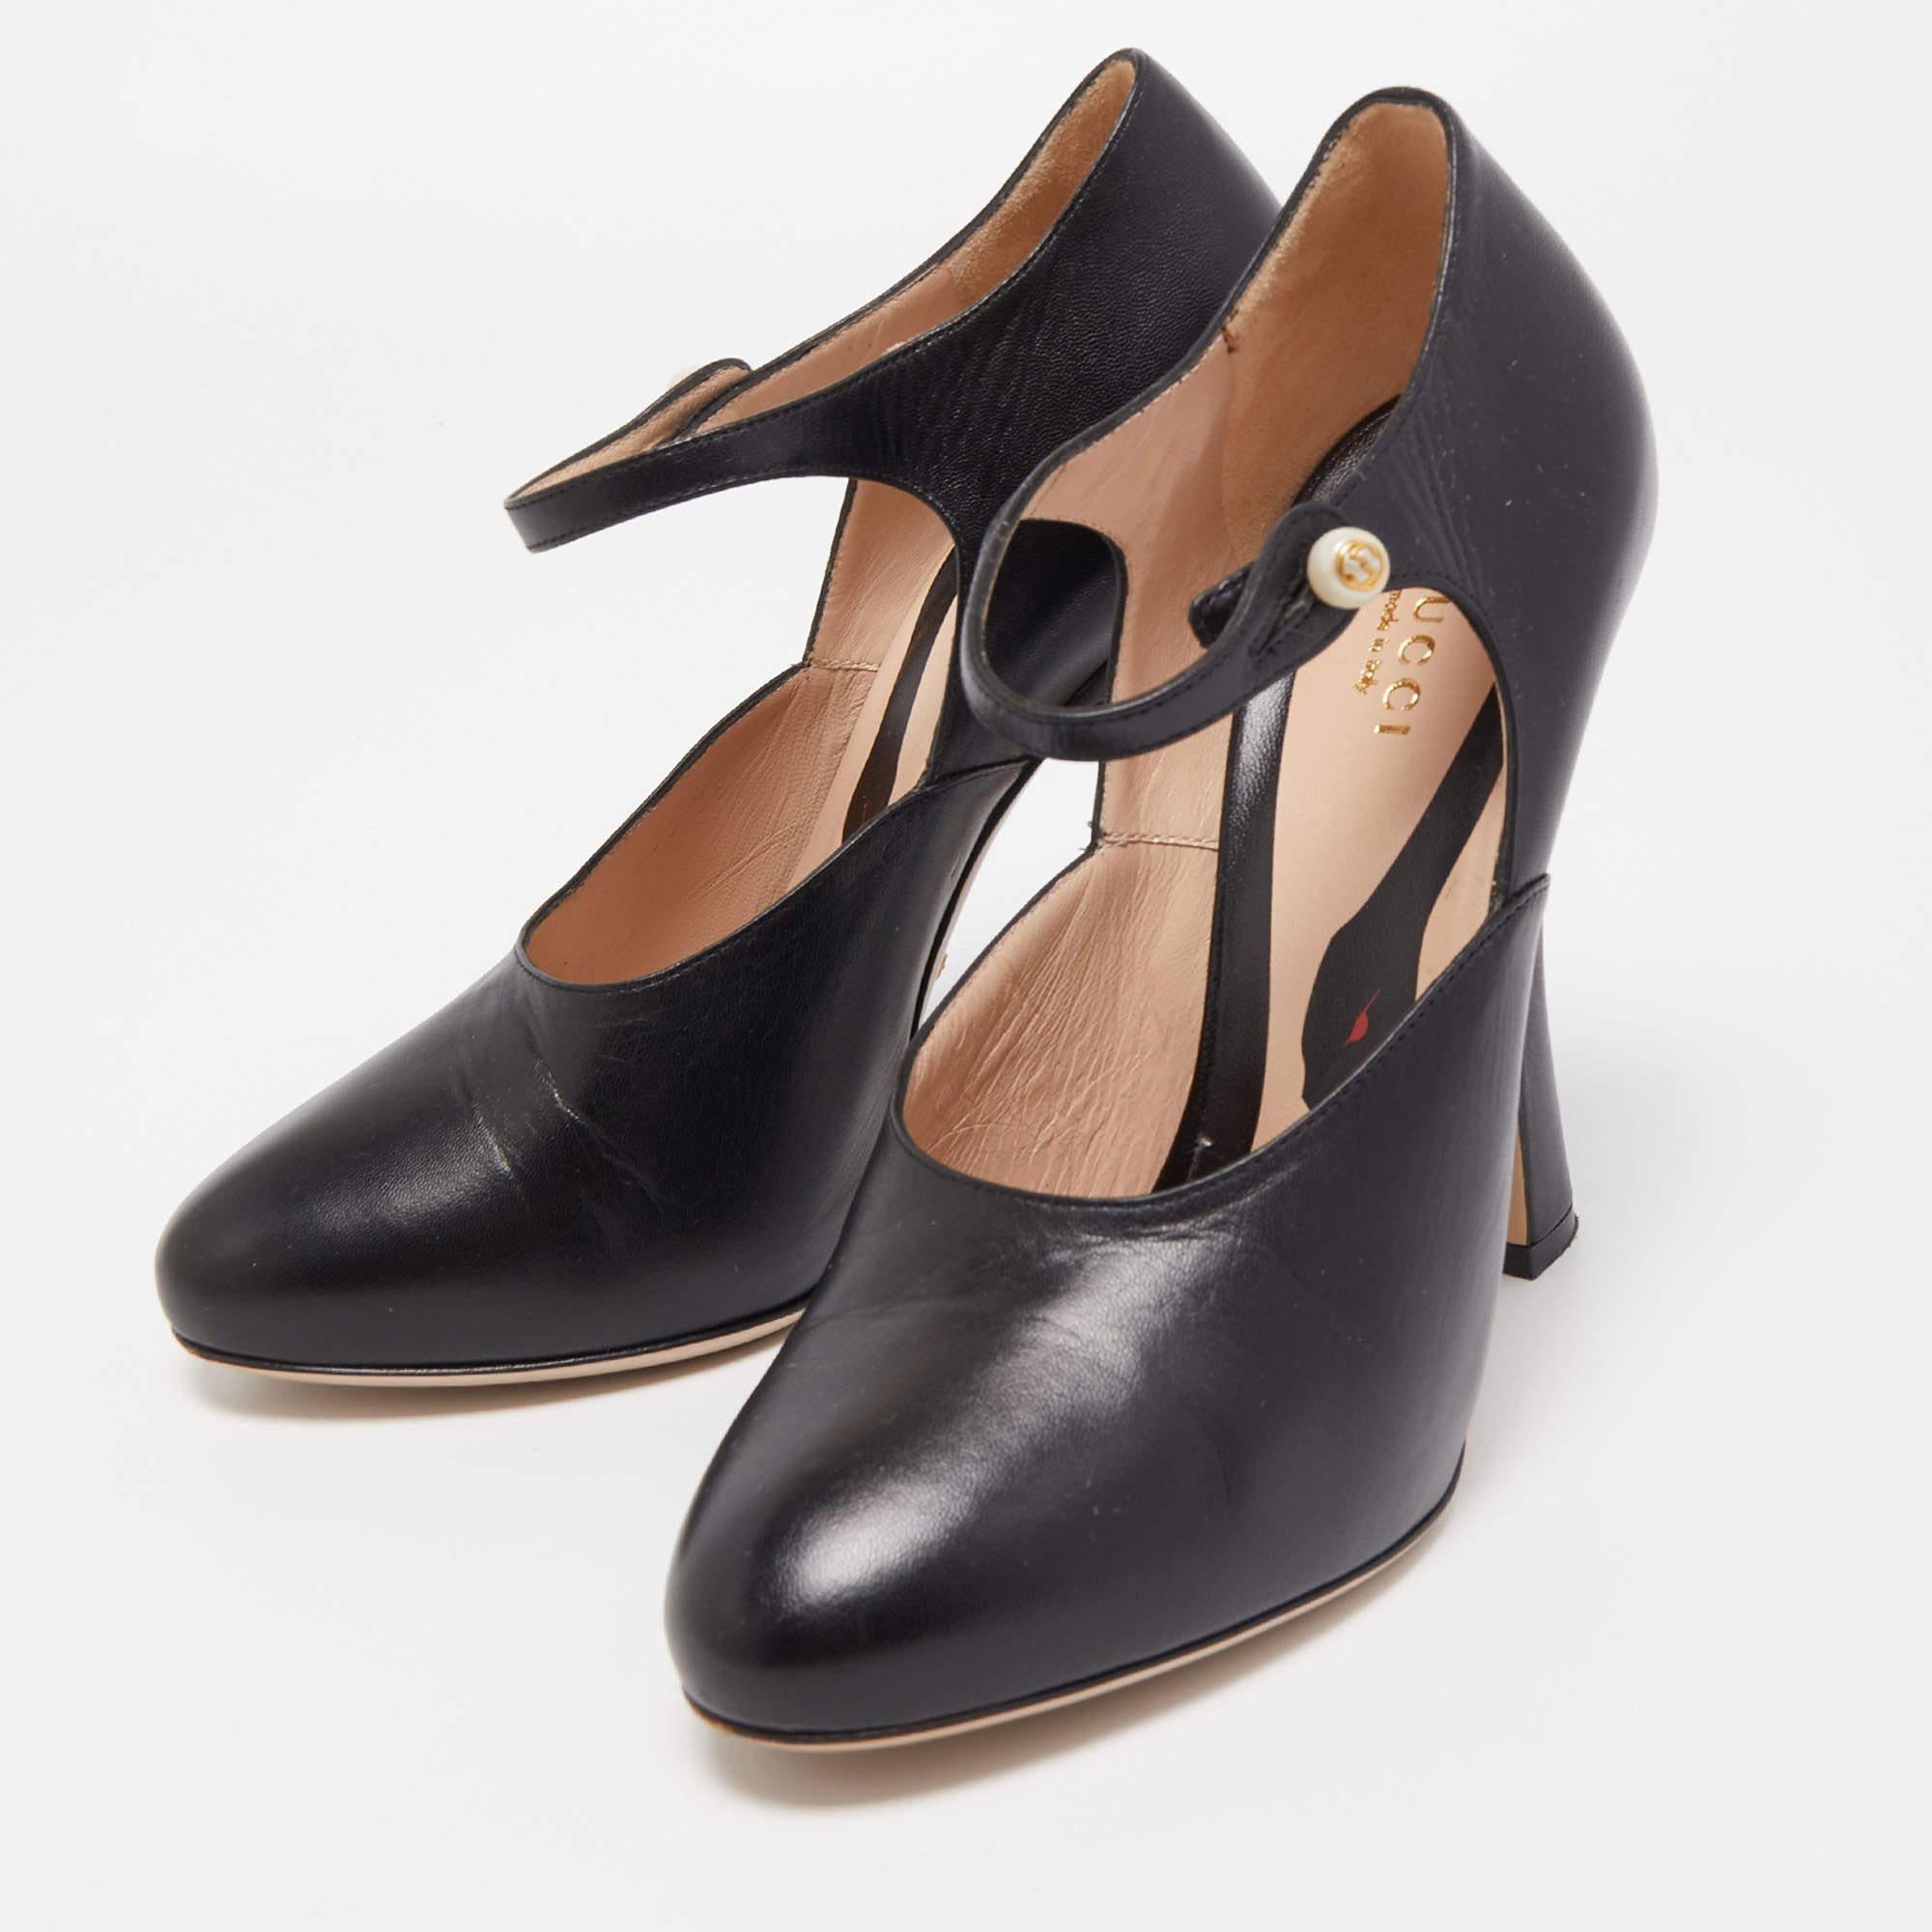 These elegant pumps for women are designed with a sleek and versatile silhouette. These designer shoes are perfect for any occasion and come with a sturdy heel and comfortable footbed. Upgrade your shoe collection with these pumps today!

Includes: